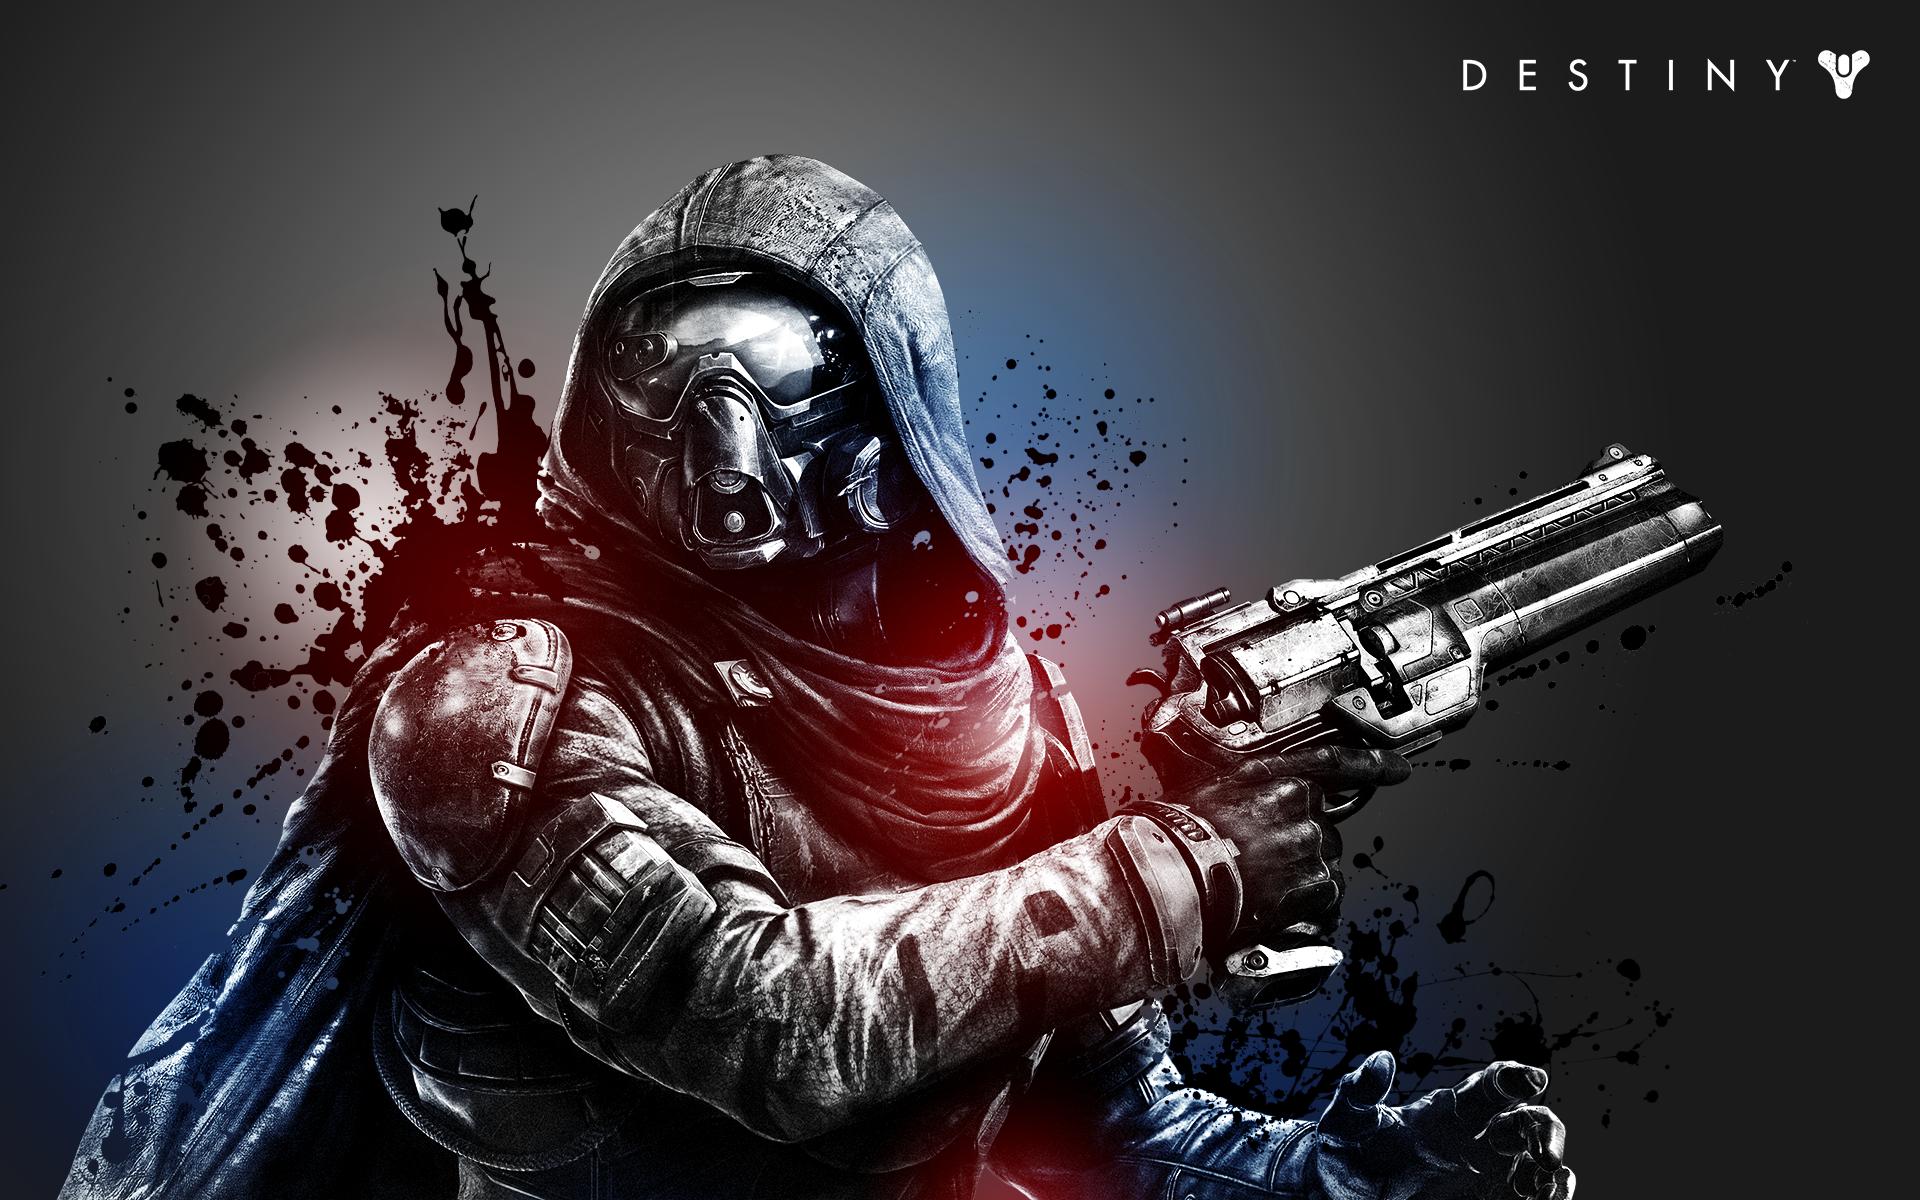 70 Awesome Destiny Wallpapers For Your Computer Tablet Or Phone Home